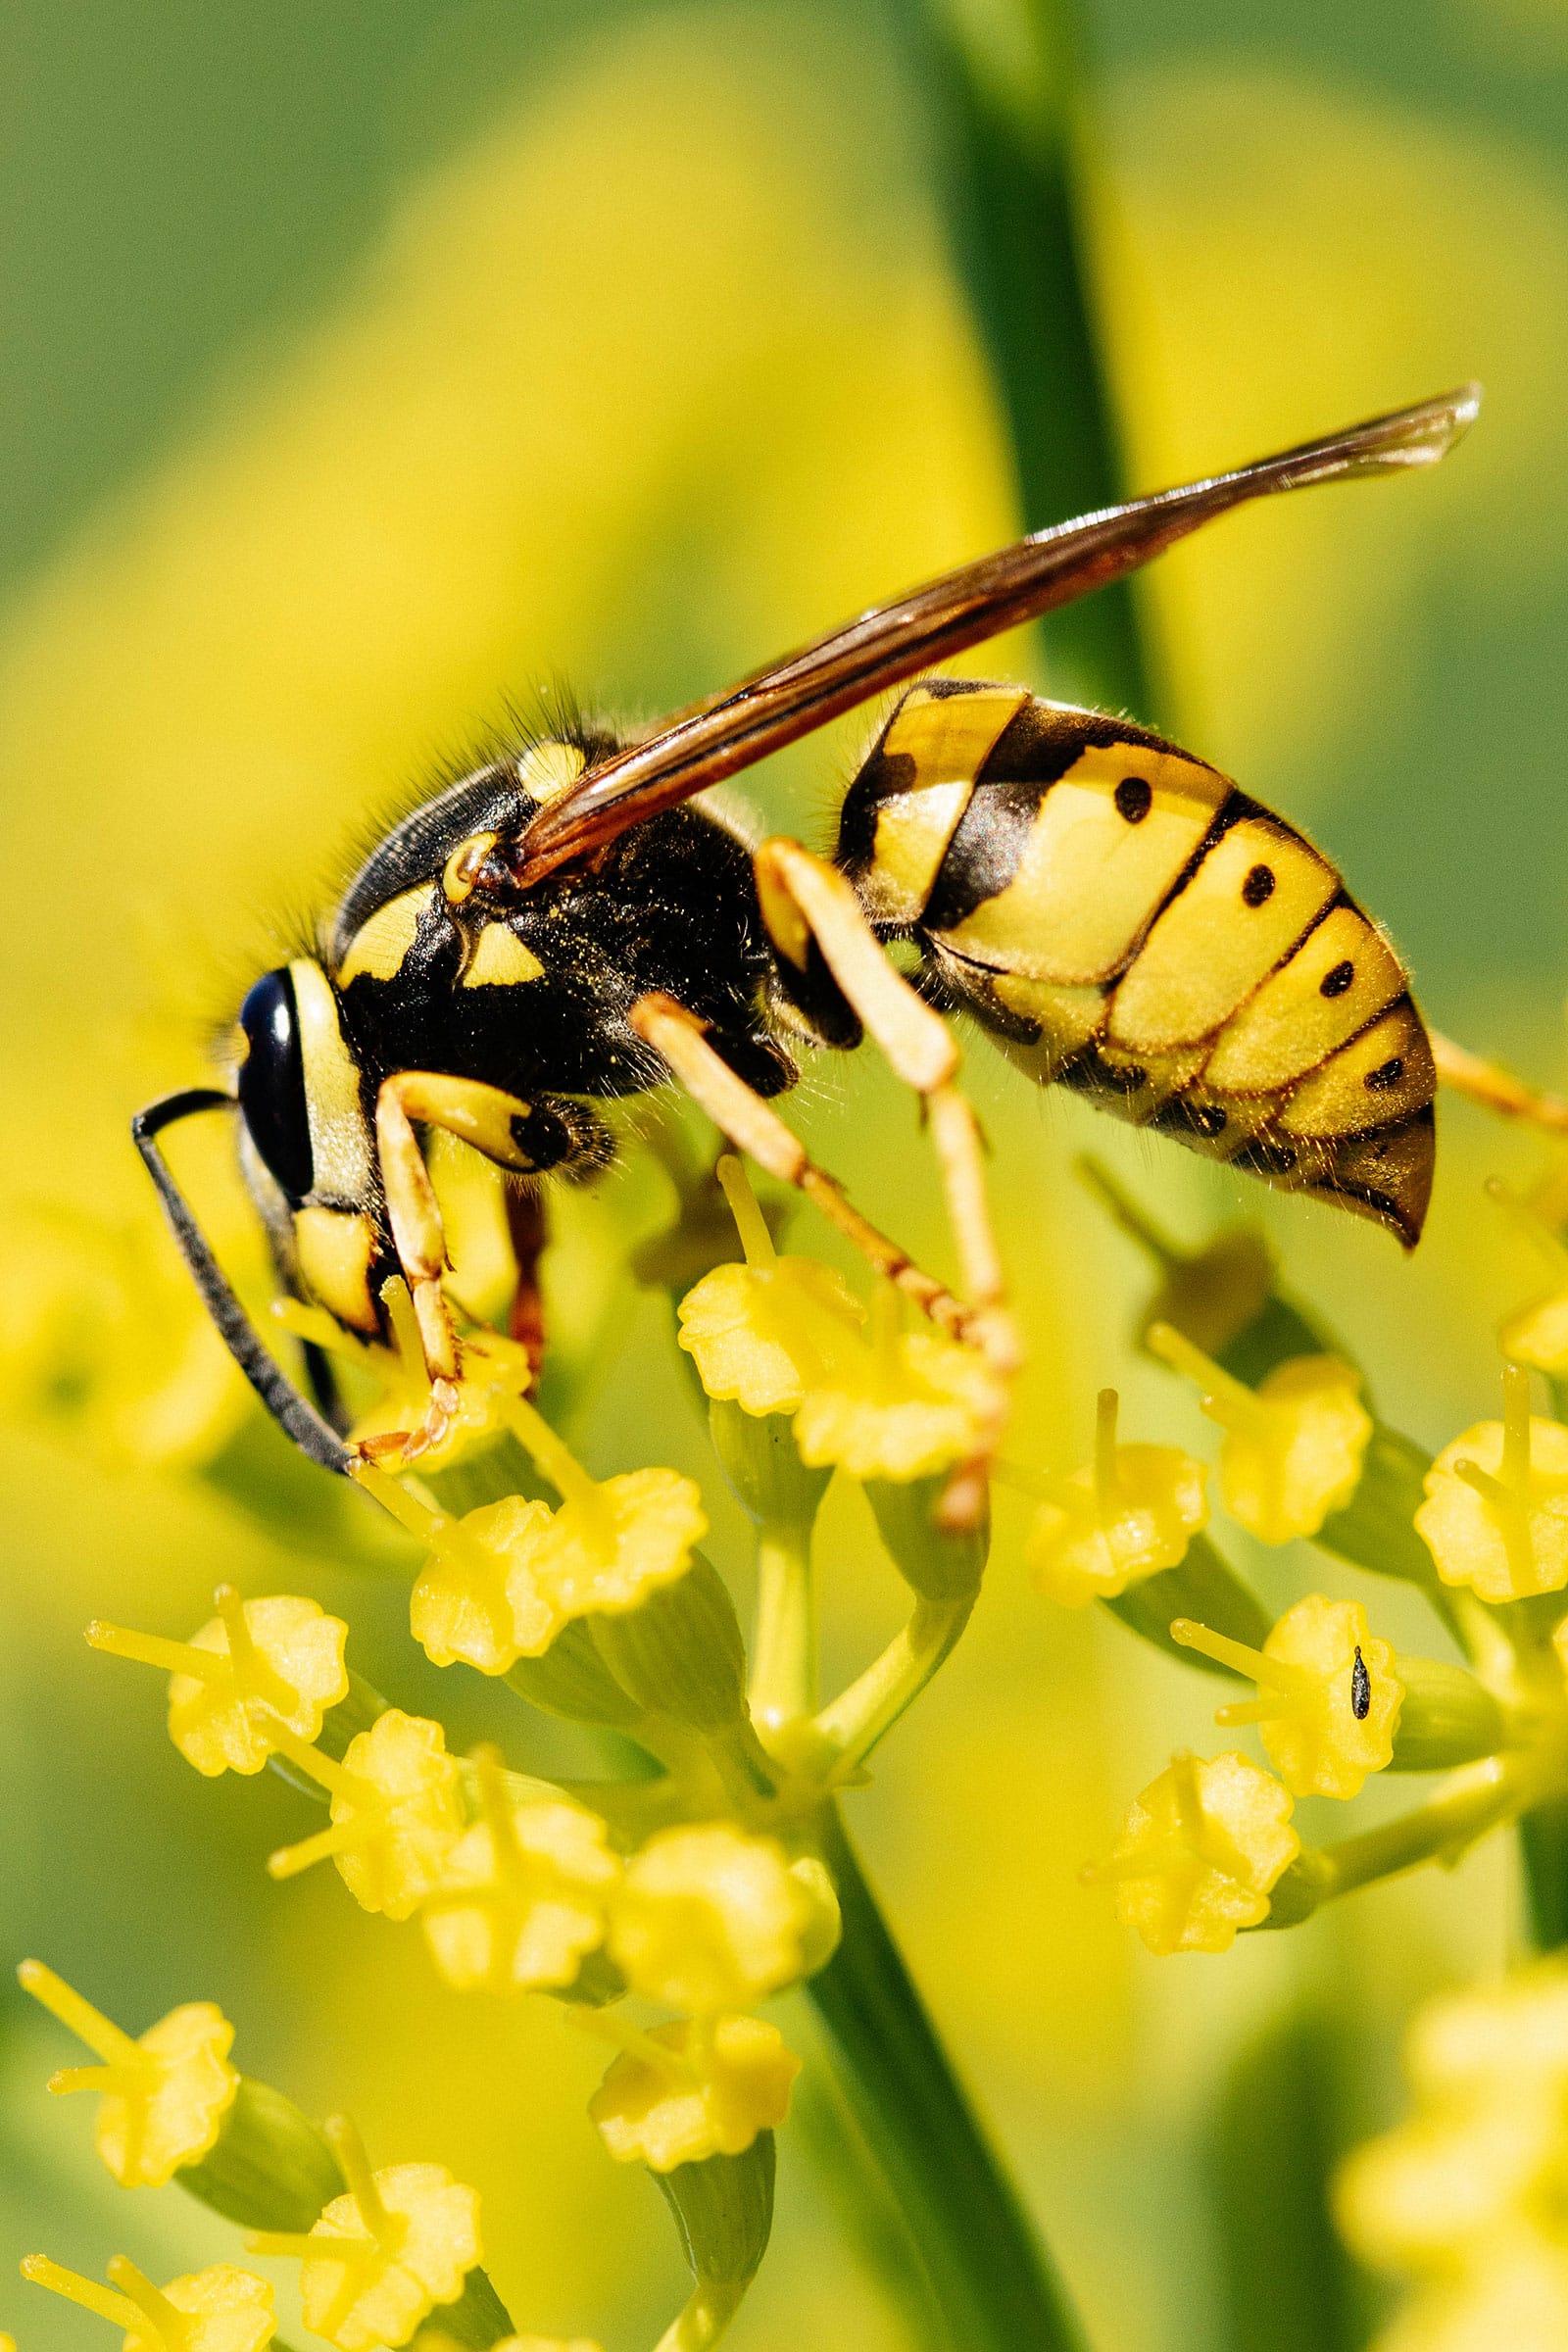 Wasp perched on yellow flower and feeding on nectar